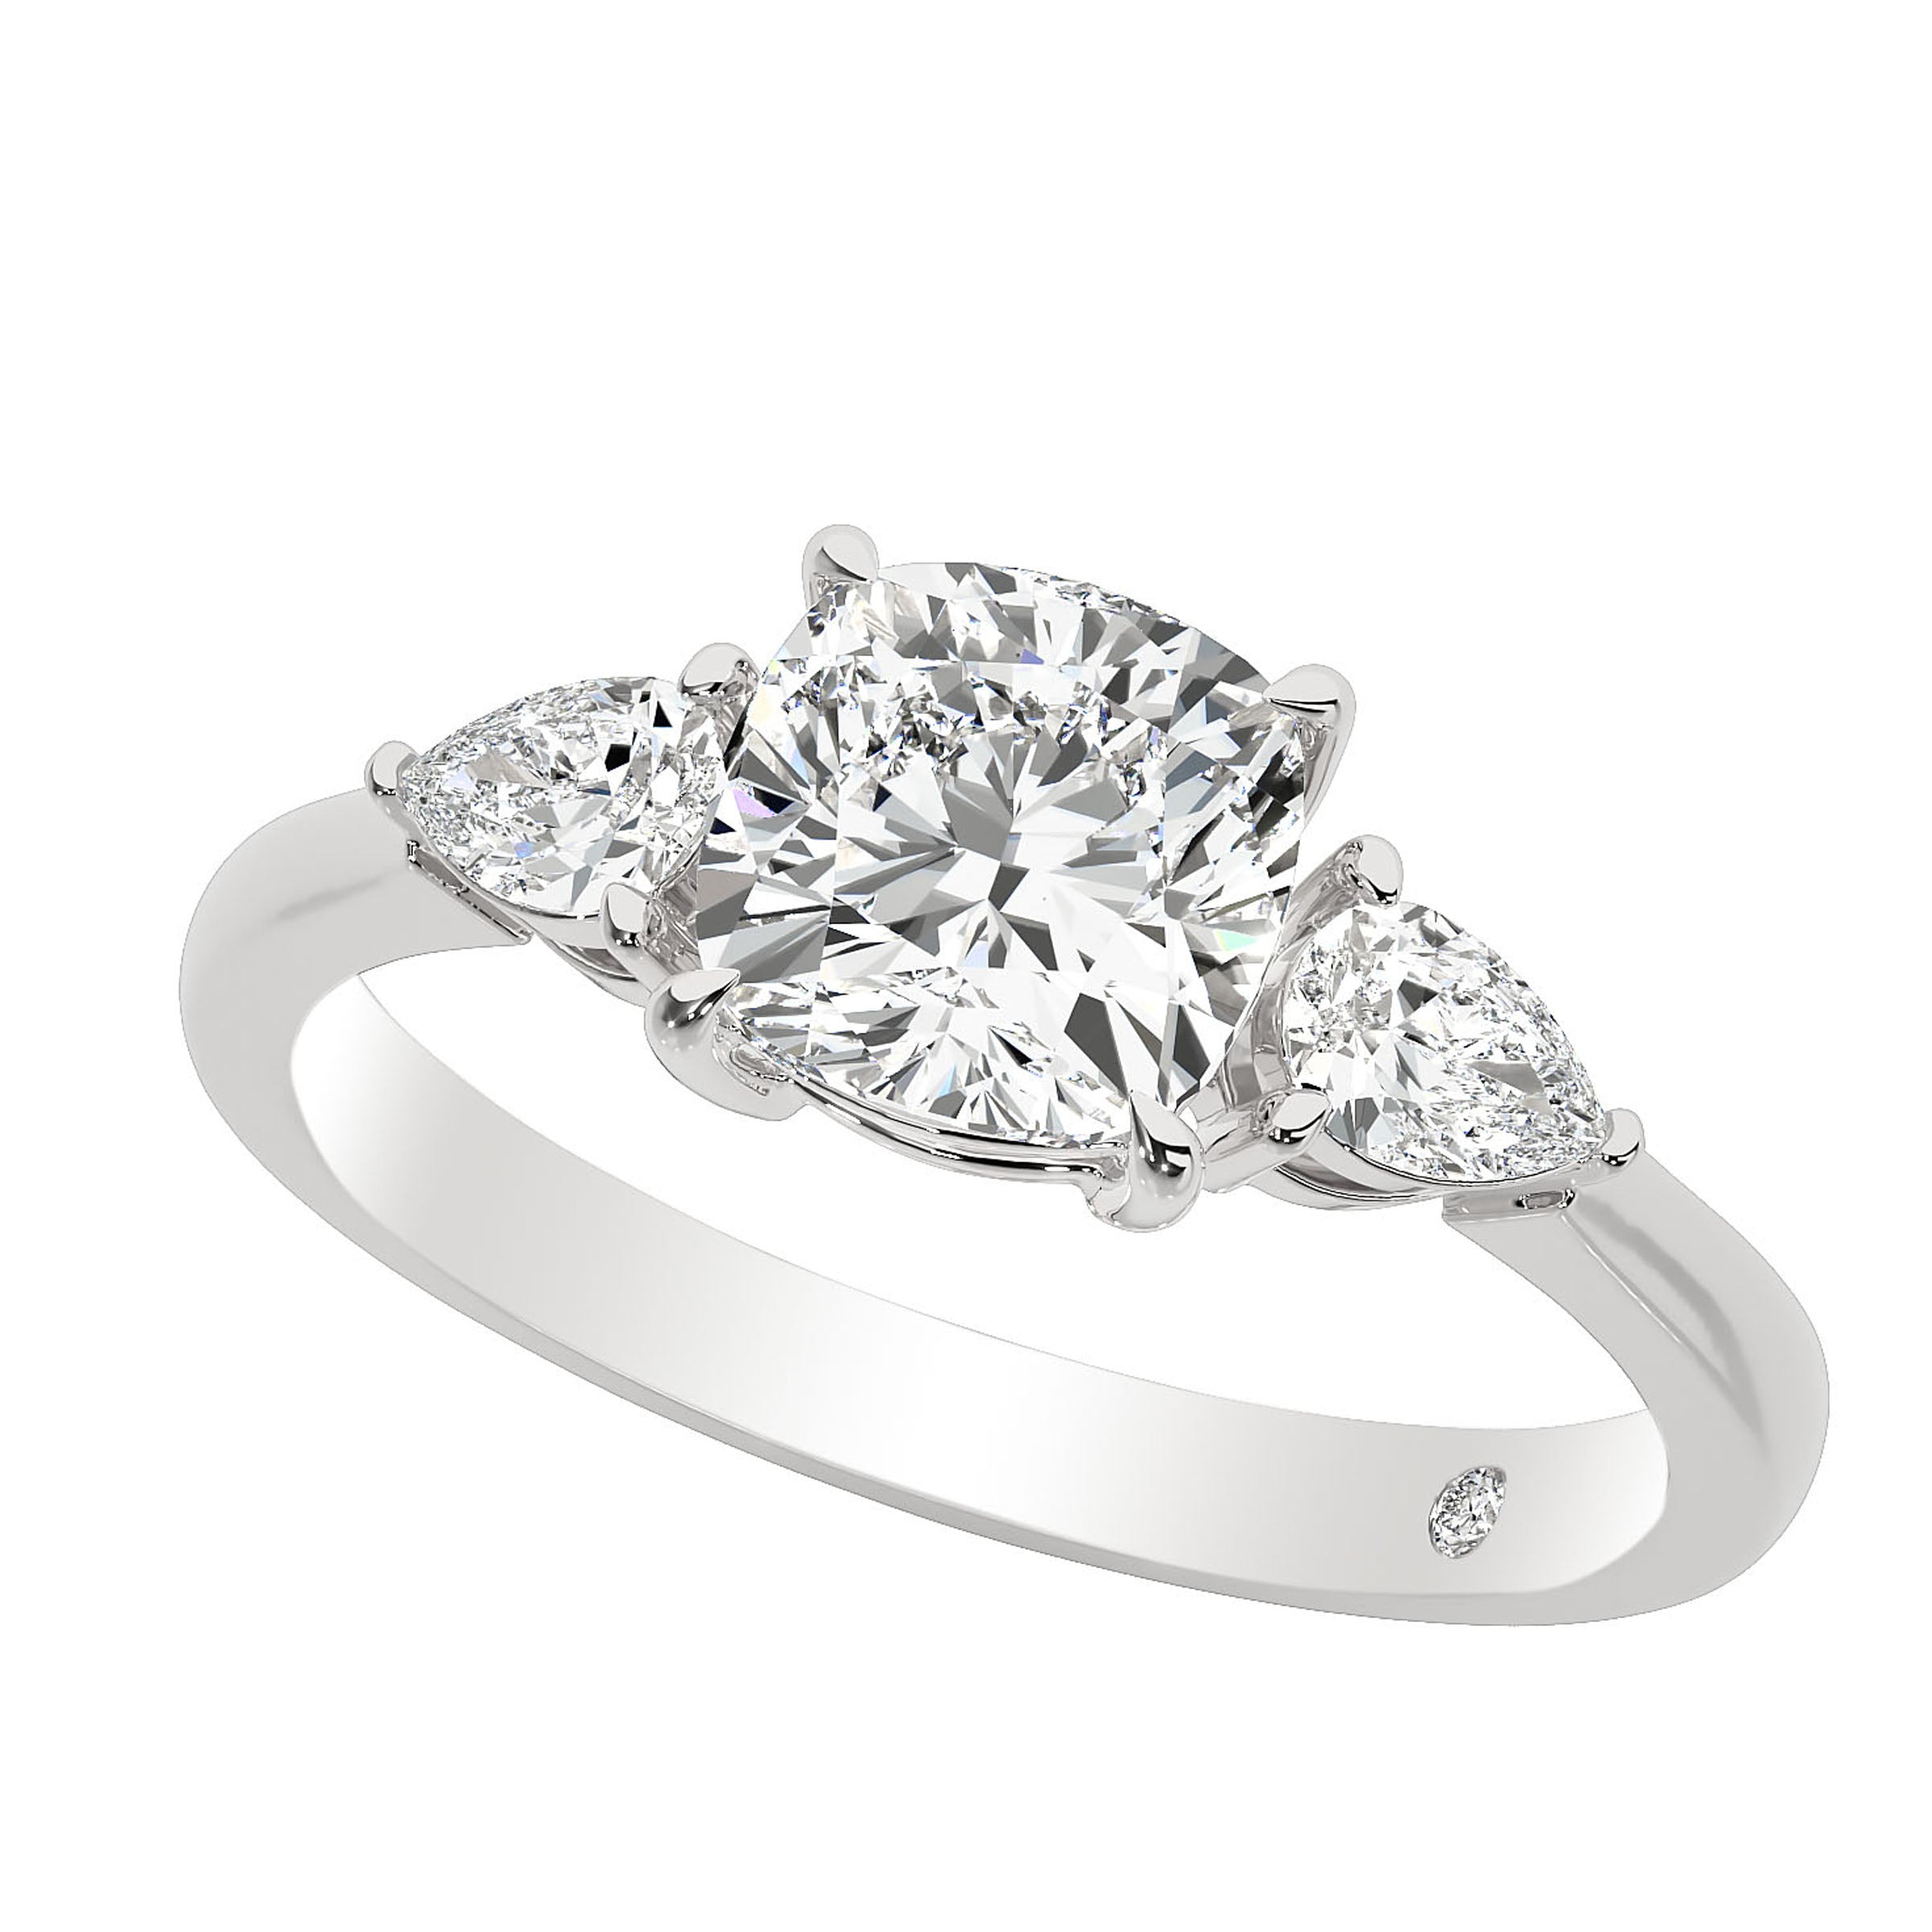 Michelle Cushion Engagement Ring